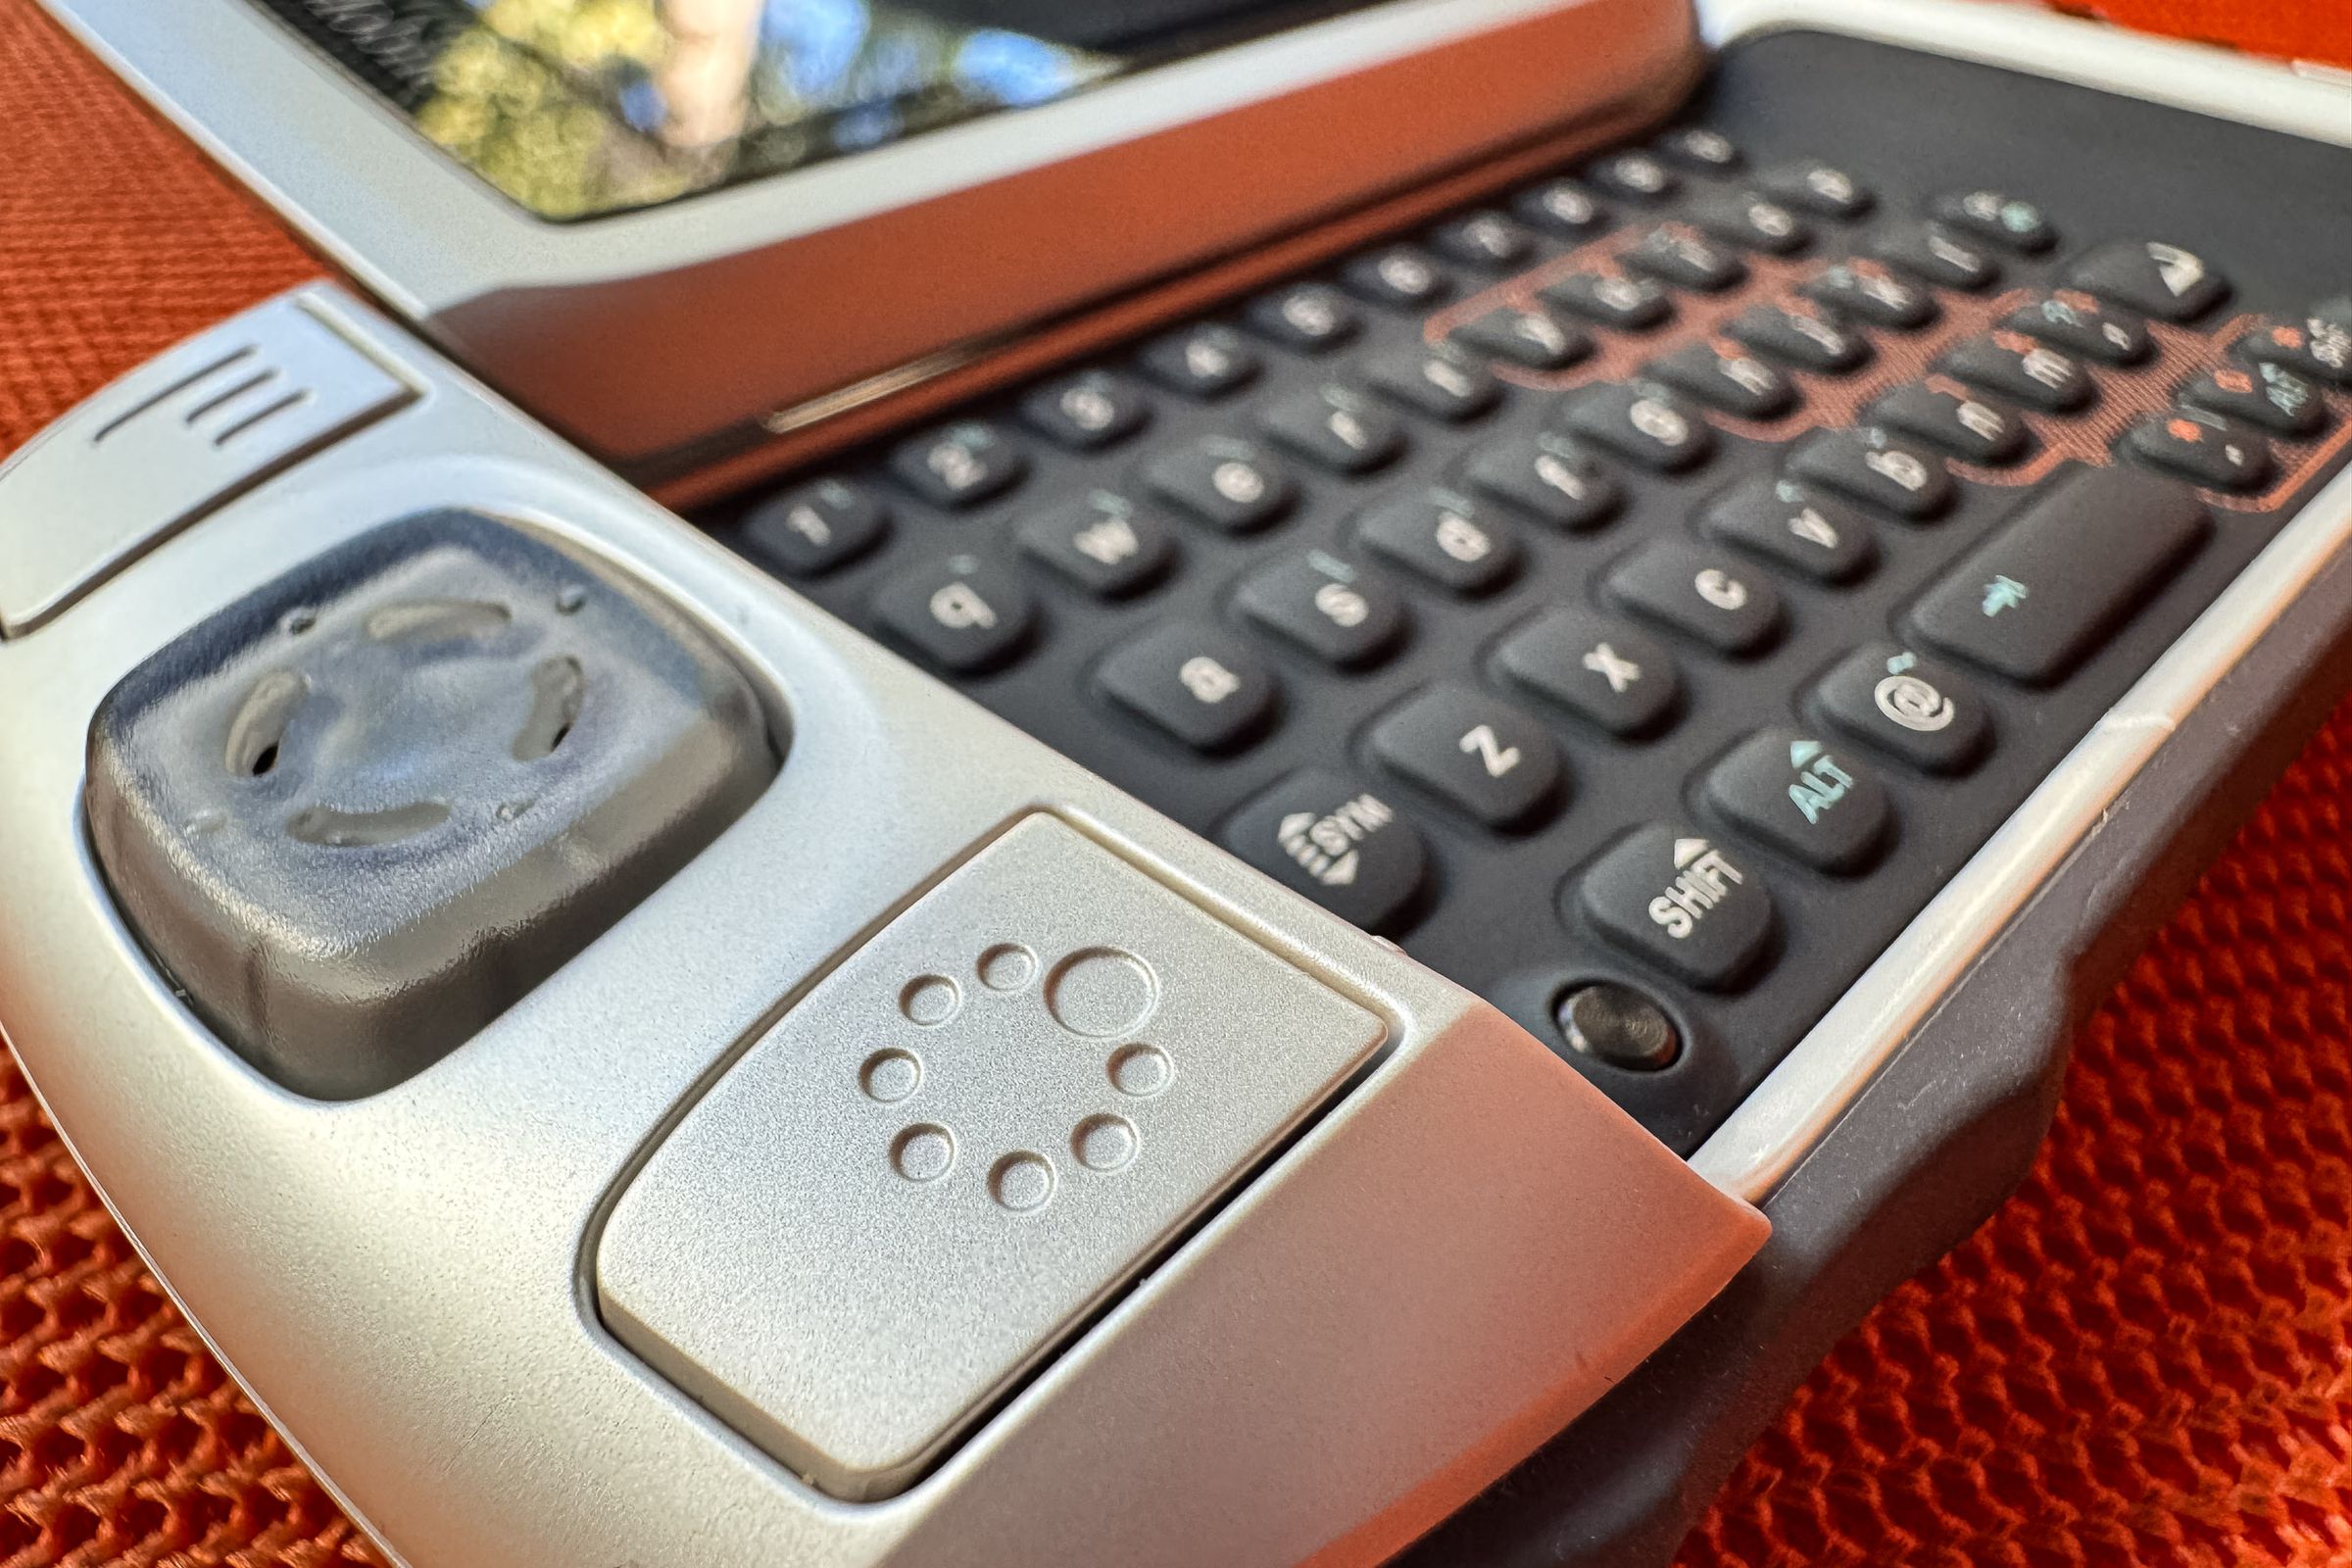 The T-Mobile Sidekick II and its unique Jump key.